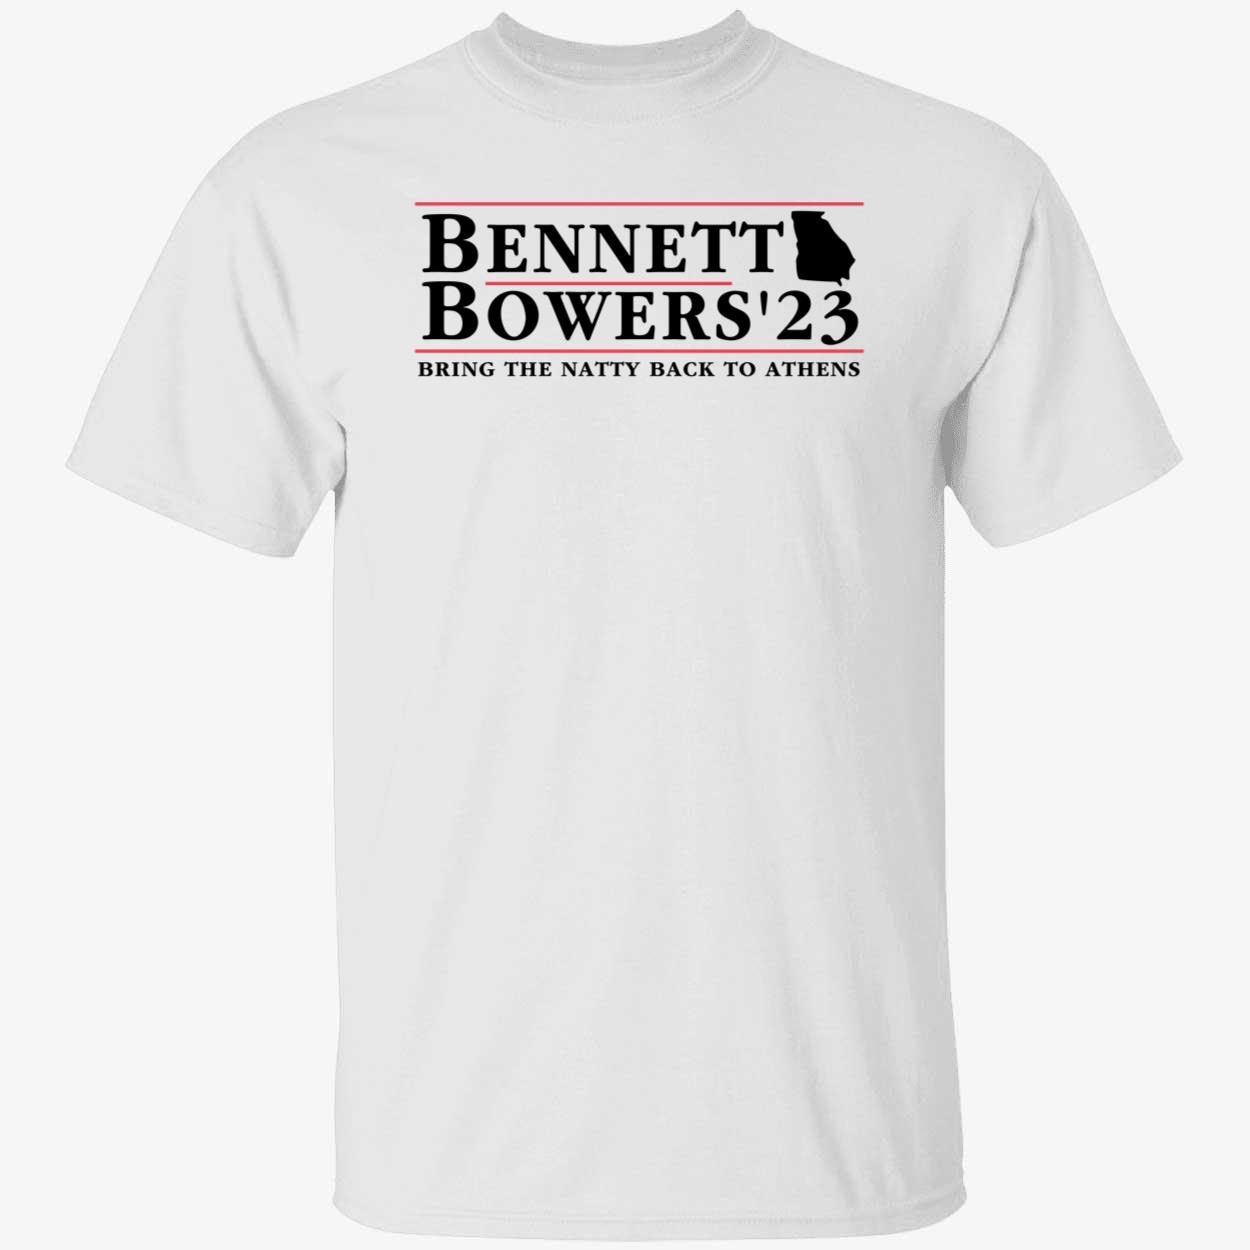 Bennett bowers 23 bring the natty back to athens Tee shirt ...